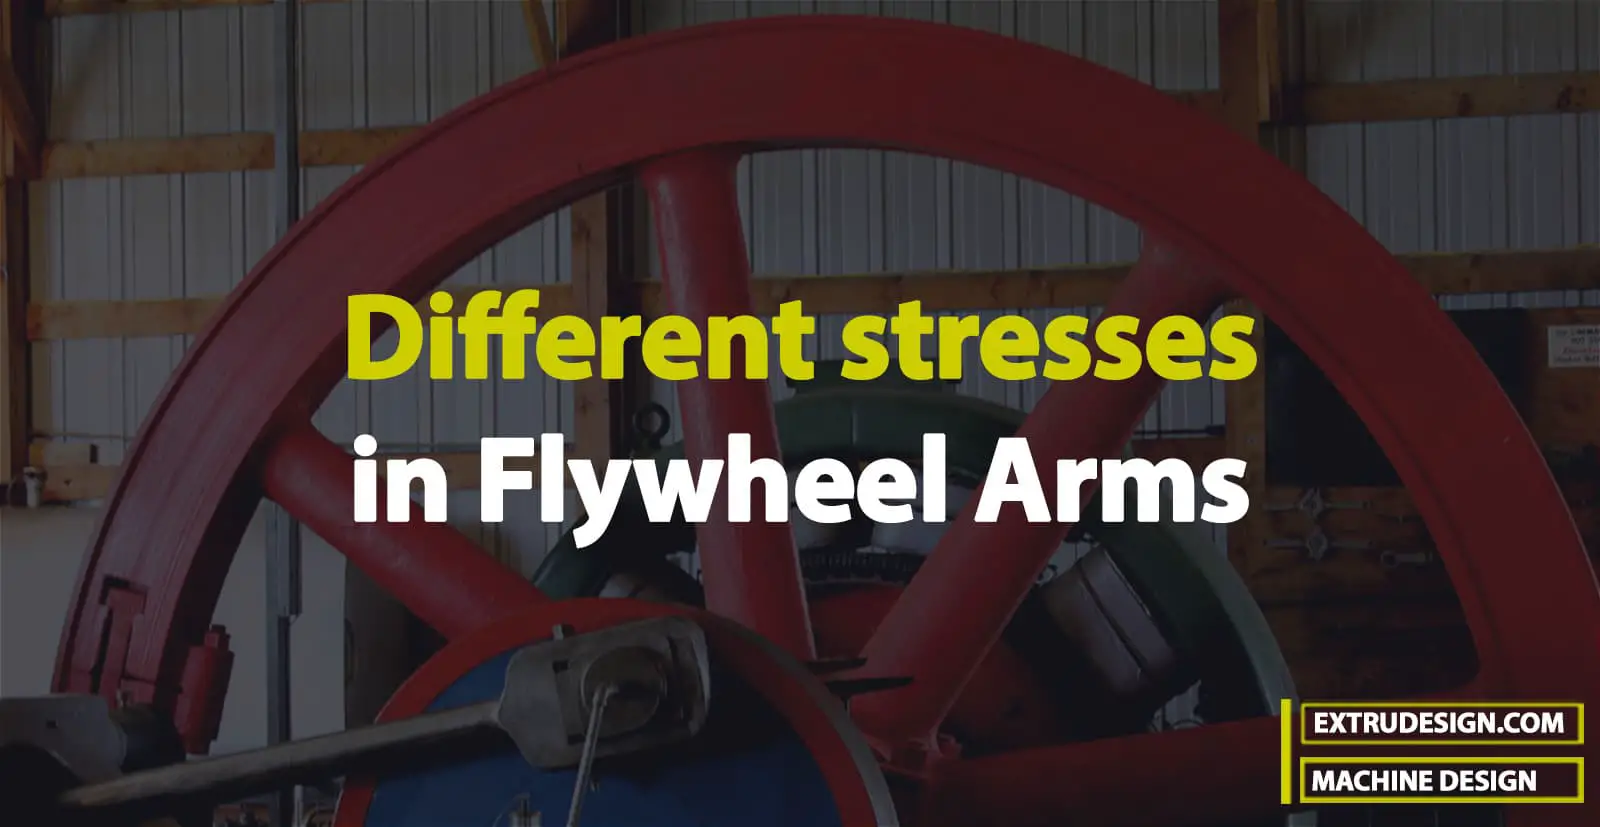 Different Stresses in a Flywheel Arms